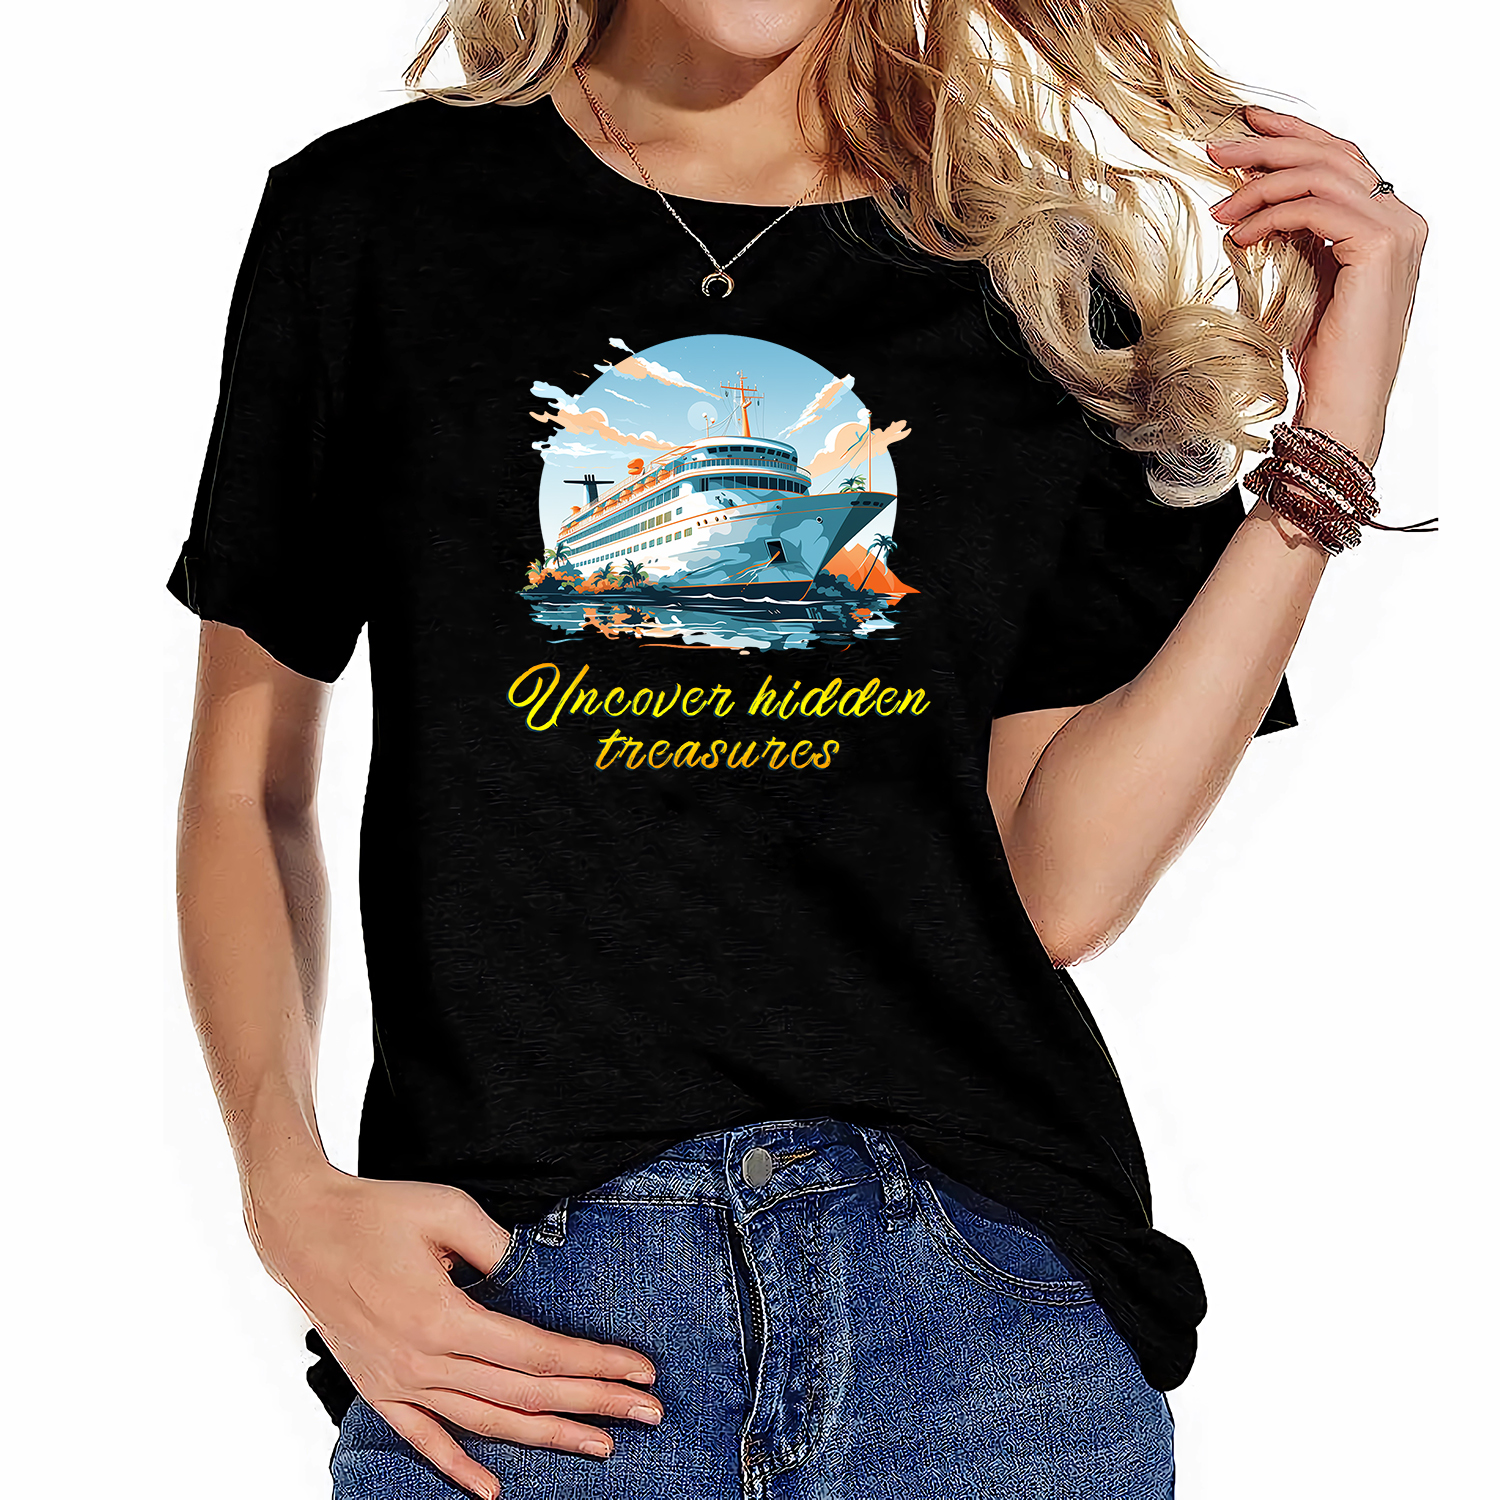 Uncover hidden treasures Cruising Ship Lover Fashion Graphic Print Women's  Short Sleeve T-Shirt, Soft and Stretchy Summer Top for Women, Cute and  Trendy Graphic Tees for Women 